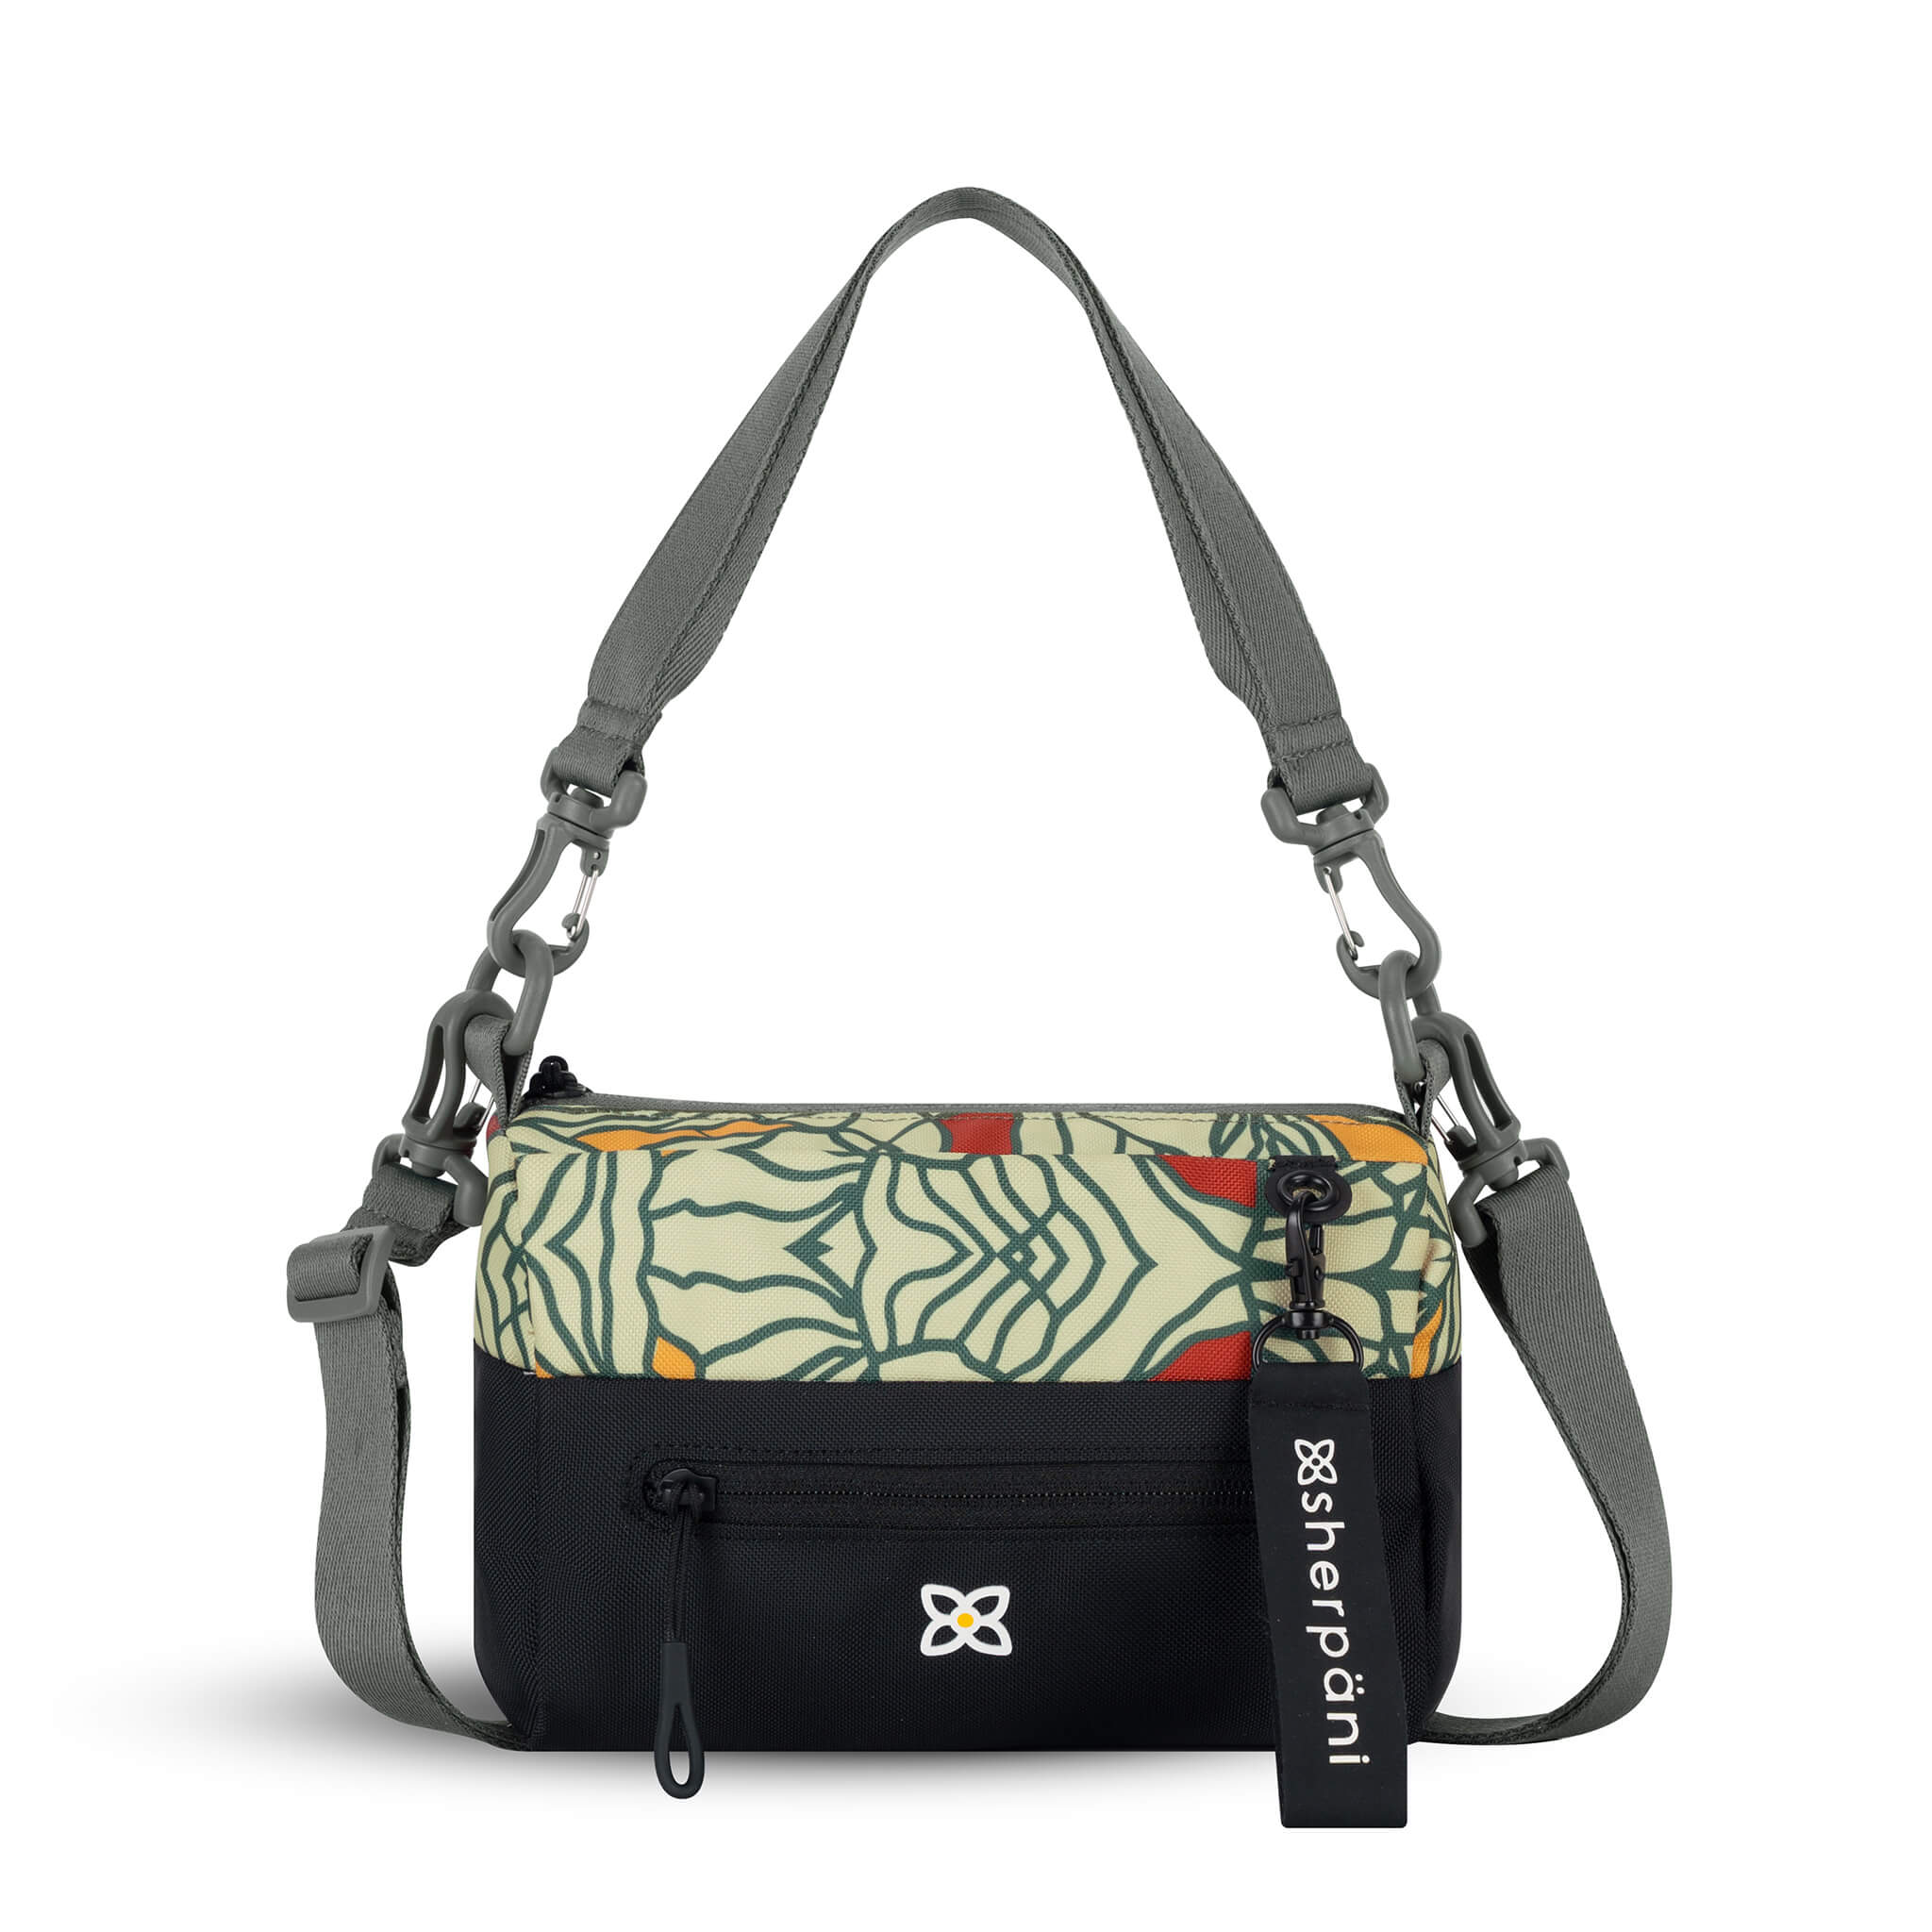 Flat front view of Sherpani mini shoulder bag, the Skye in Fiori. Skye features include RFID security, detachable keychain, outside zipper pocket, two inside zipper pockets and two removable straps: a short shoulder strap and a longer adjustable crossbody strap. The Fiori colorway is two-toned in black and a floral pattern with a neutral color palette.